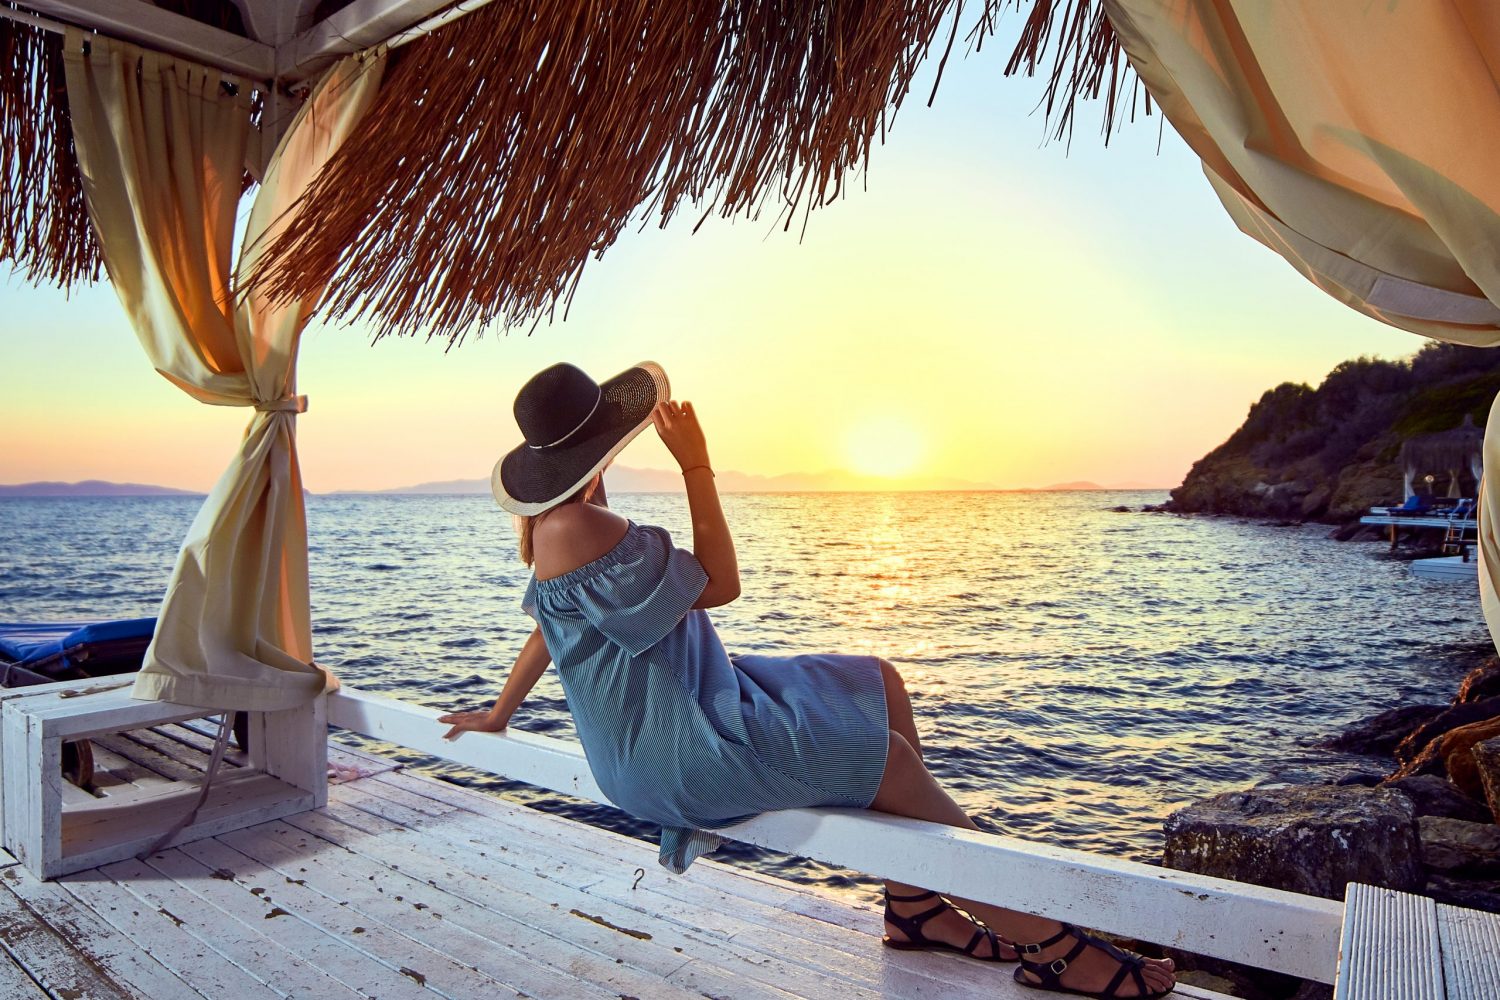 Woman in hat relaxing by the sea in a luxurious beachfront hotel resort at sunset enjoying perfect beach holiday vacation in Bodrum, Turkey. Outdoors Seascape Summer Travel Concept